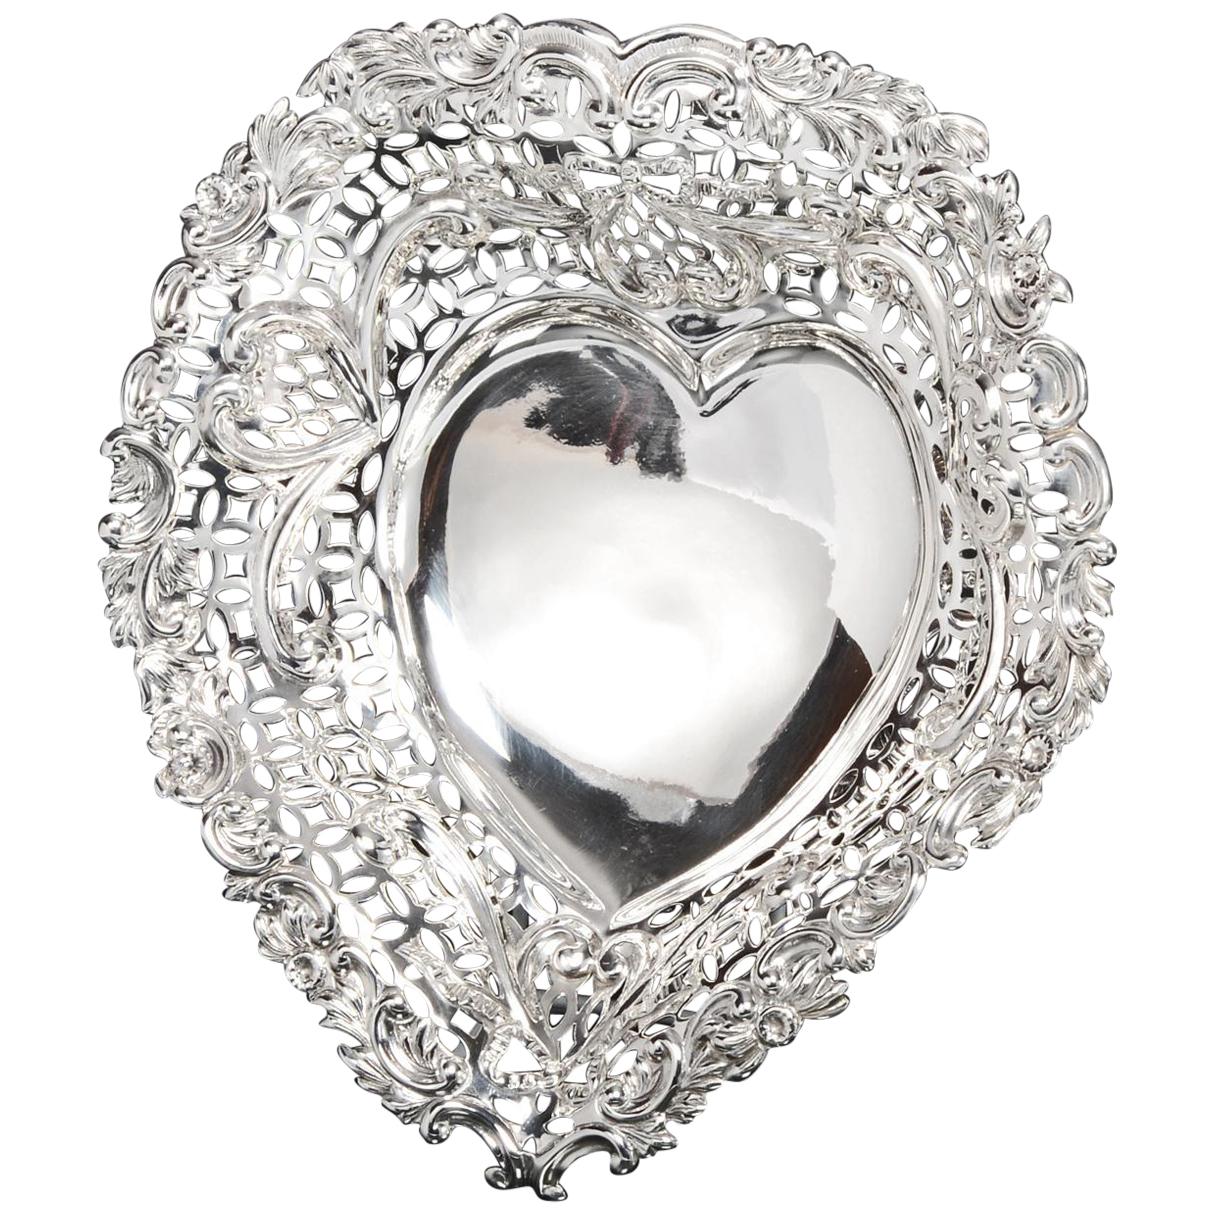 Large Silver Heart Shaped Dish